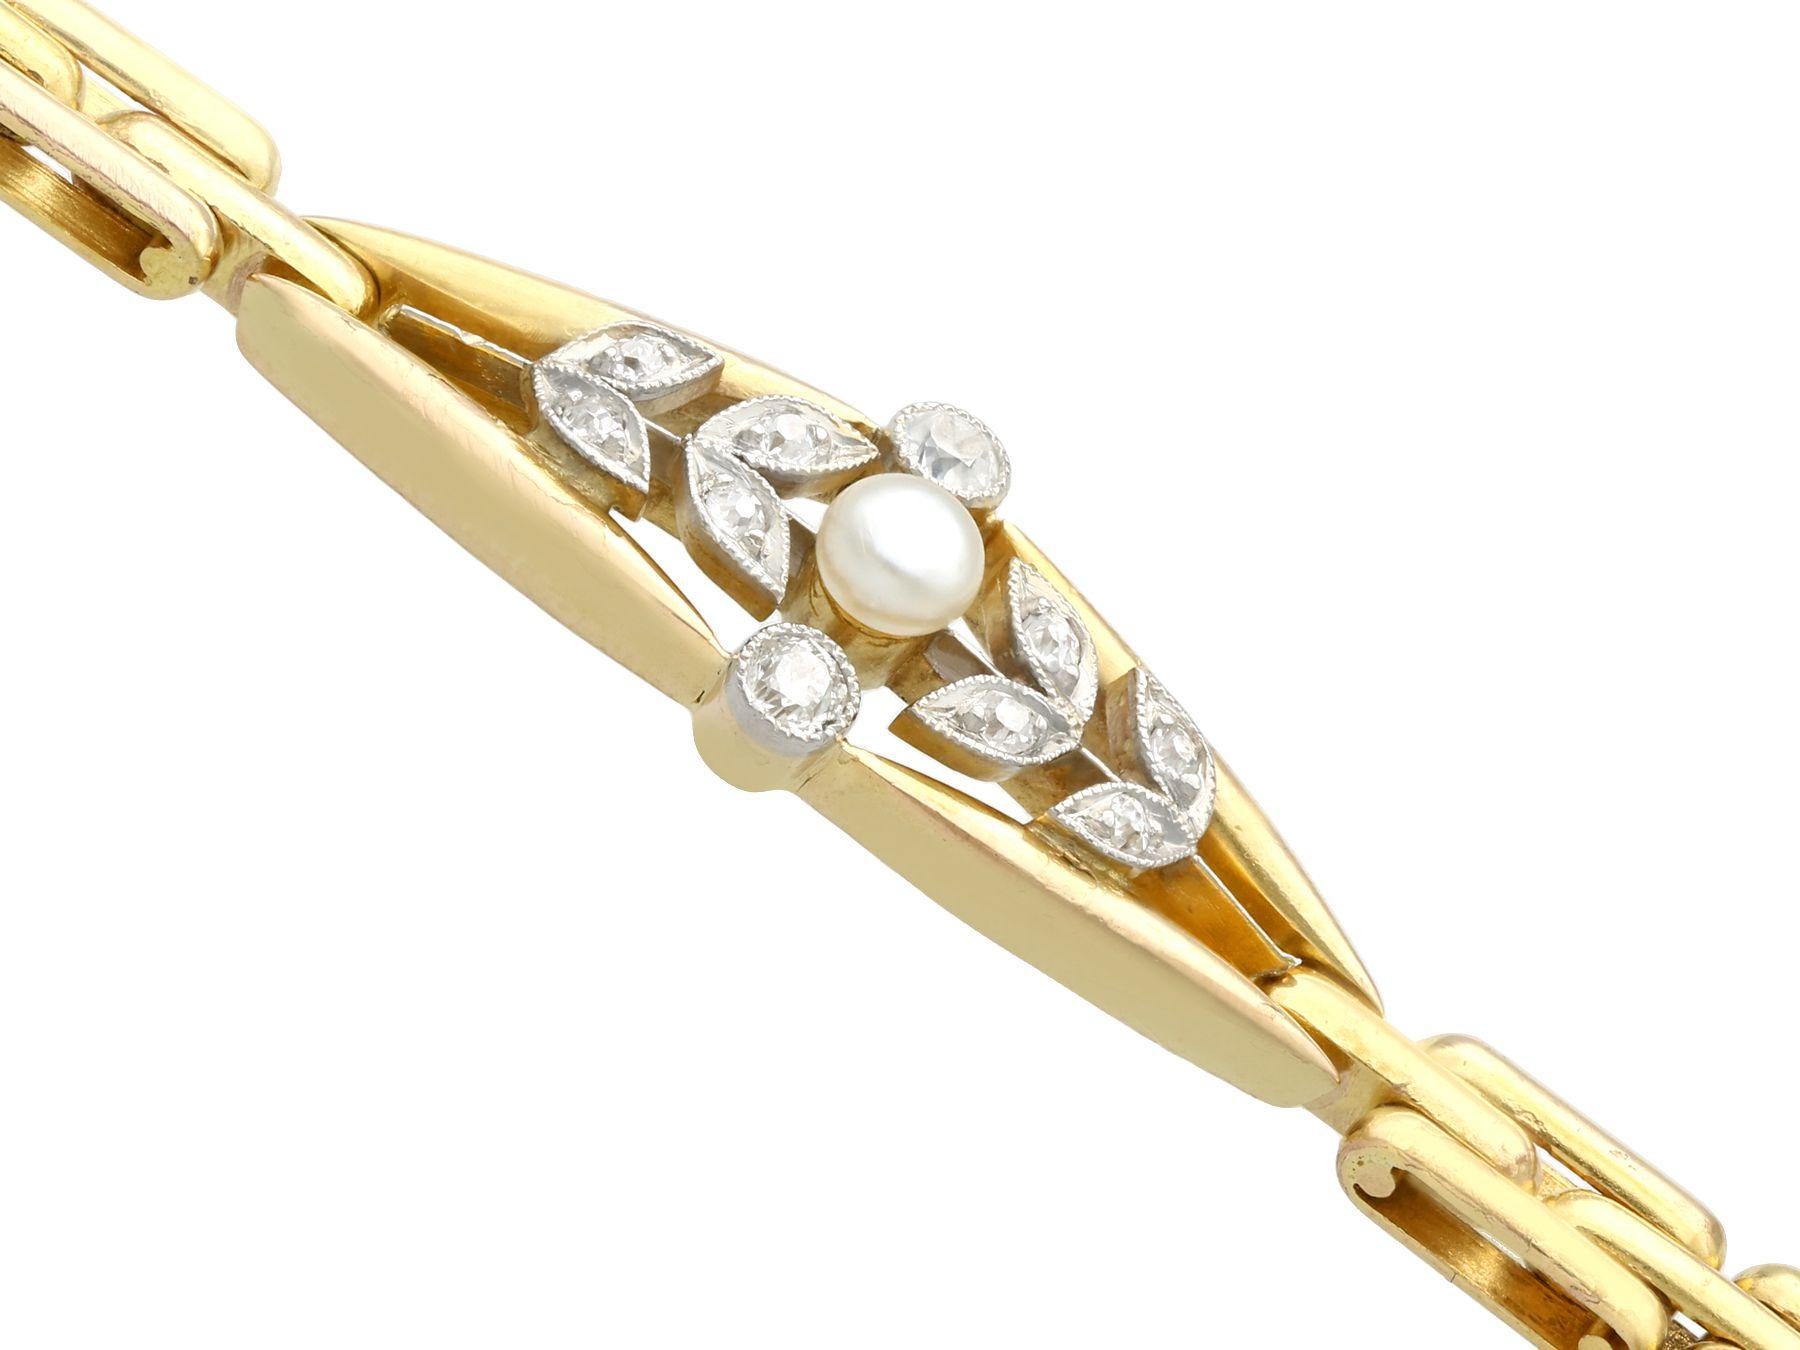 A fine and impressive antique 0.25 carat diamond and pearl, 14 karat yellow gold bracelet; part of our diverse antique jewelry and estate jewelry collections.

This fine and impressive antique bracelet has been crafted in 14k yellow gold with a